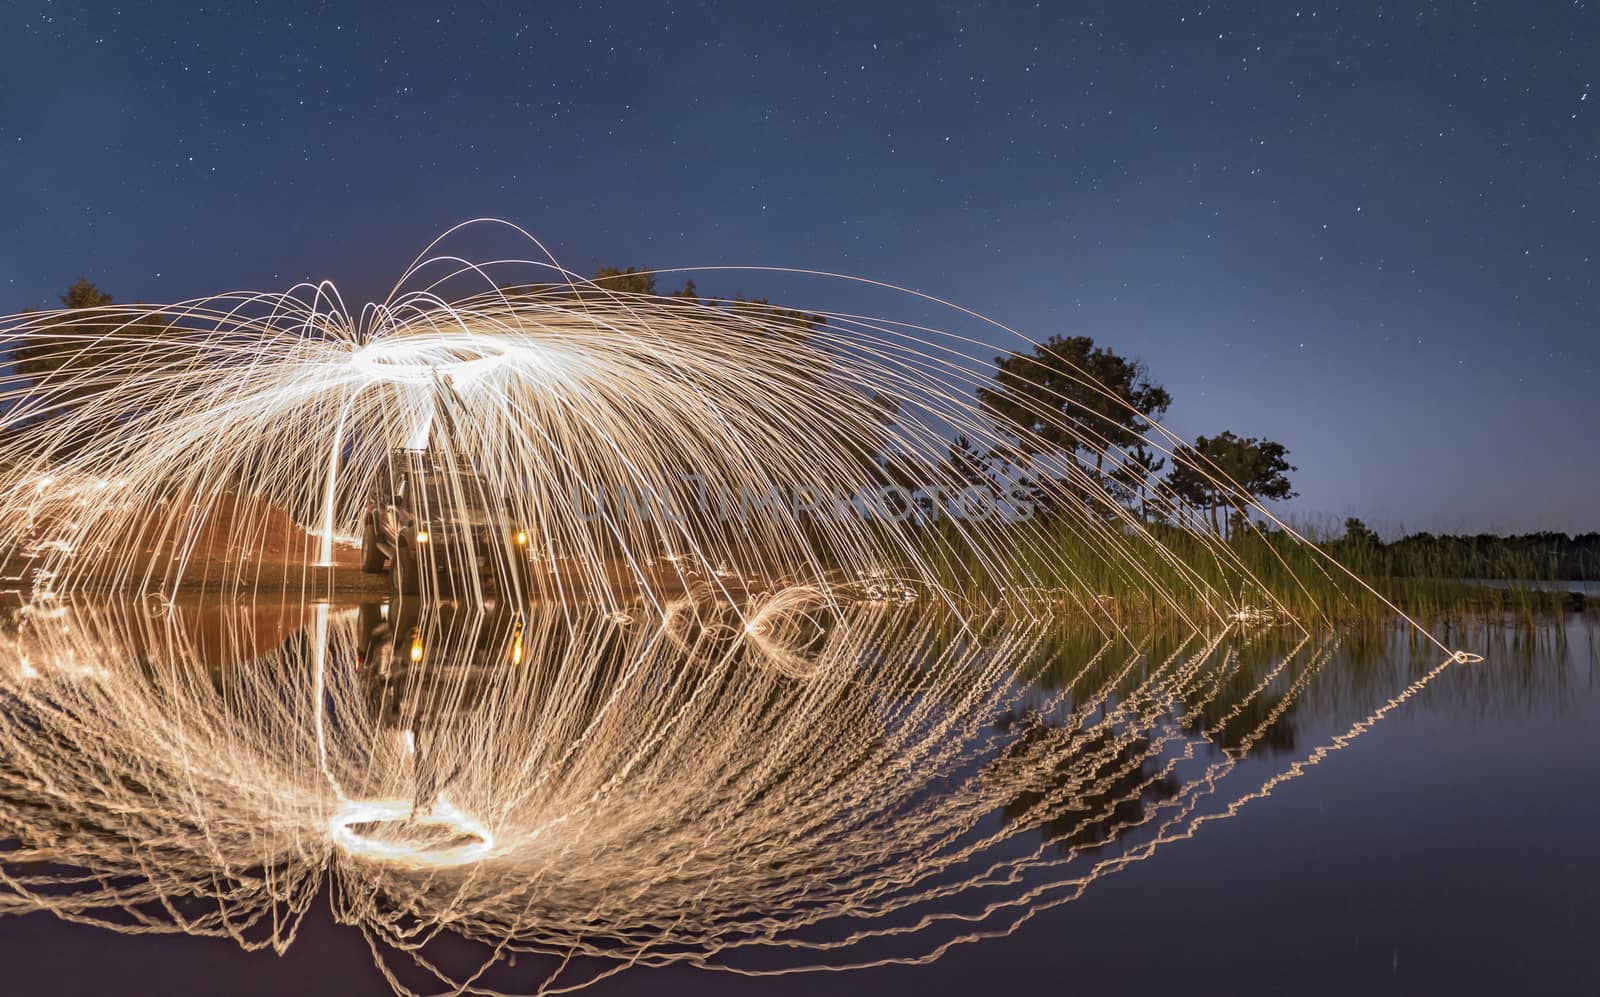 example of long exposure photography